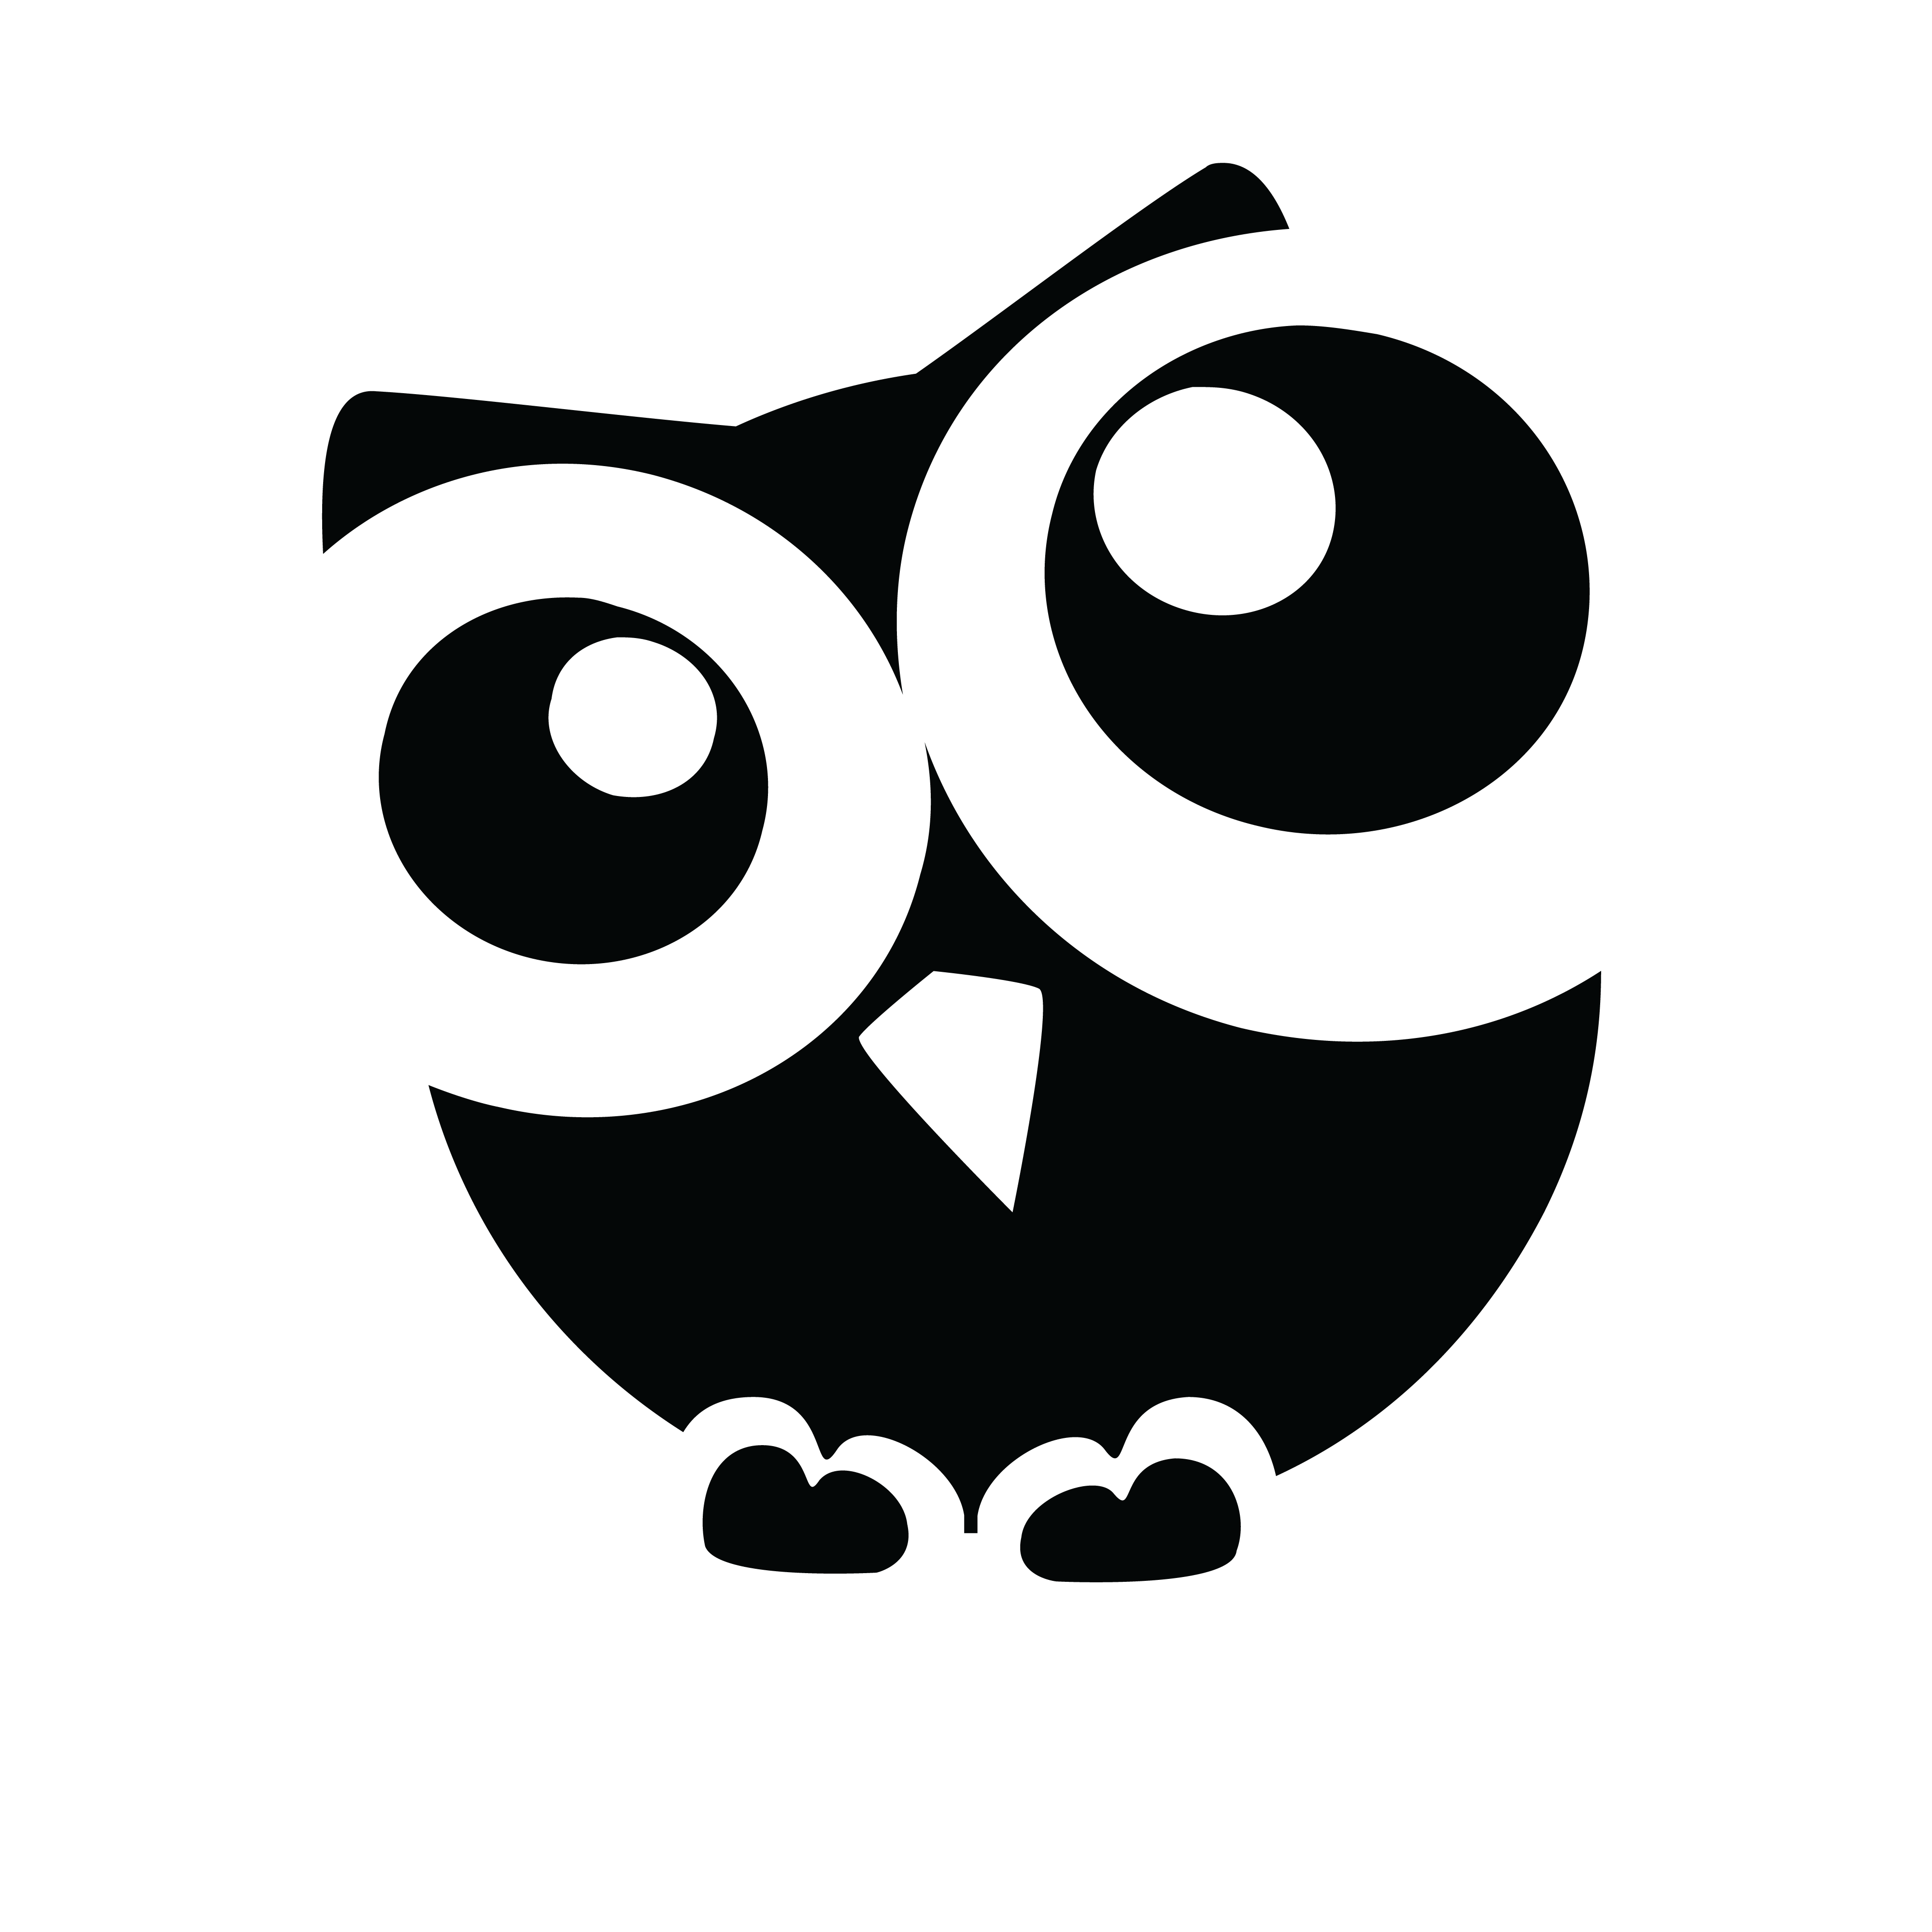 owl images clipart black and white - photo #16